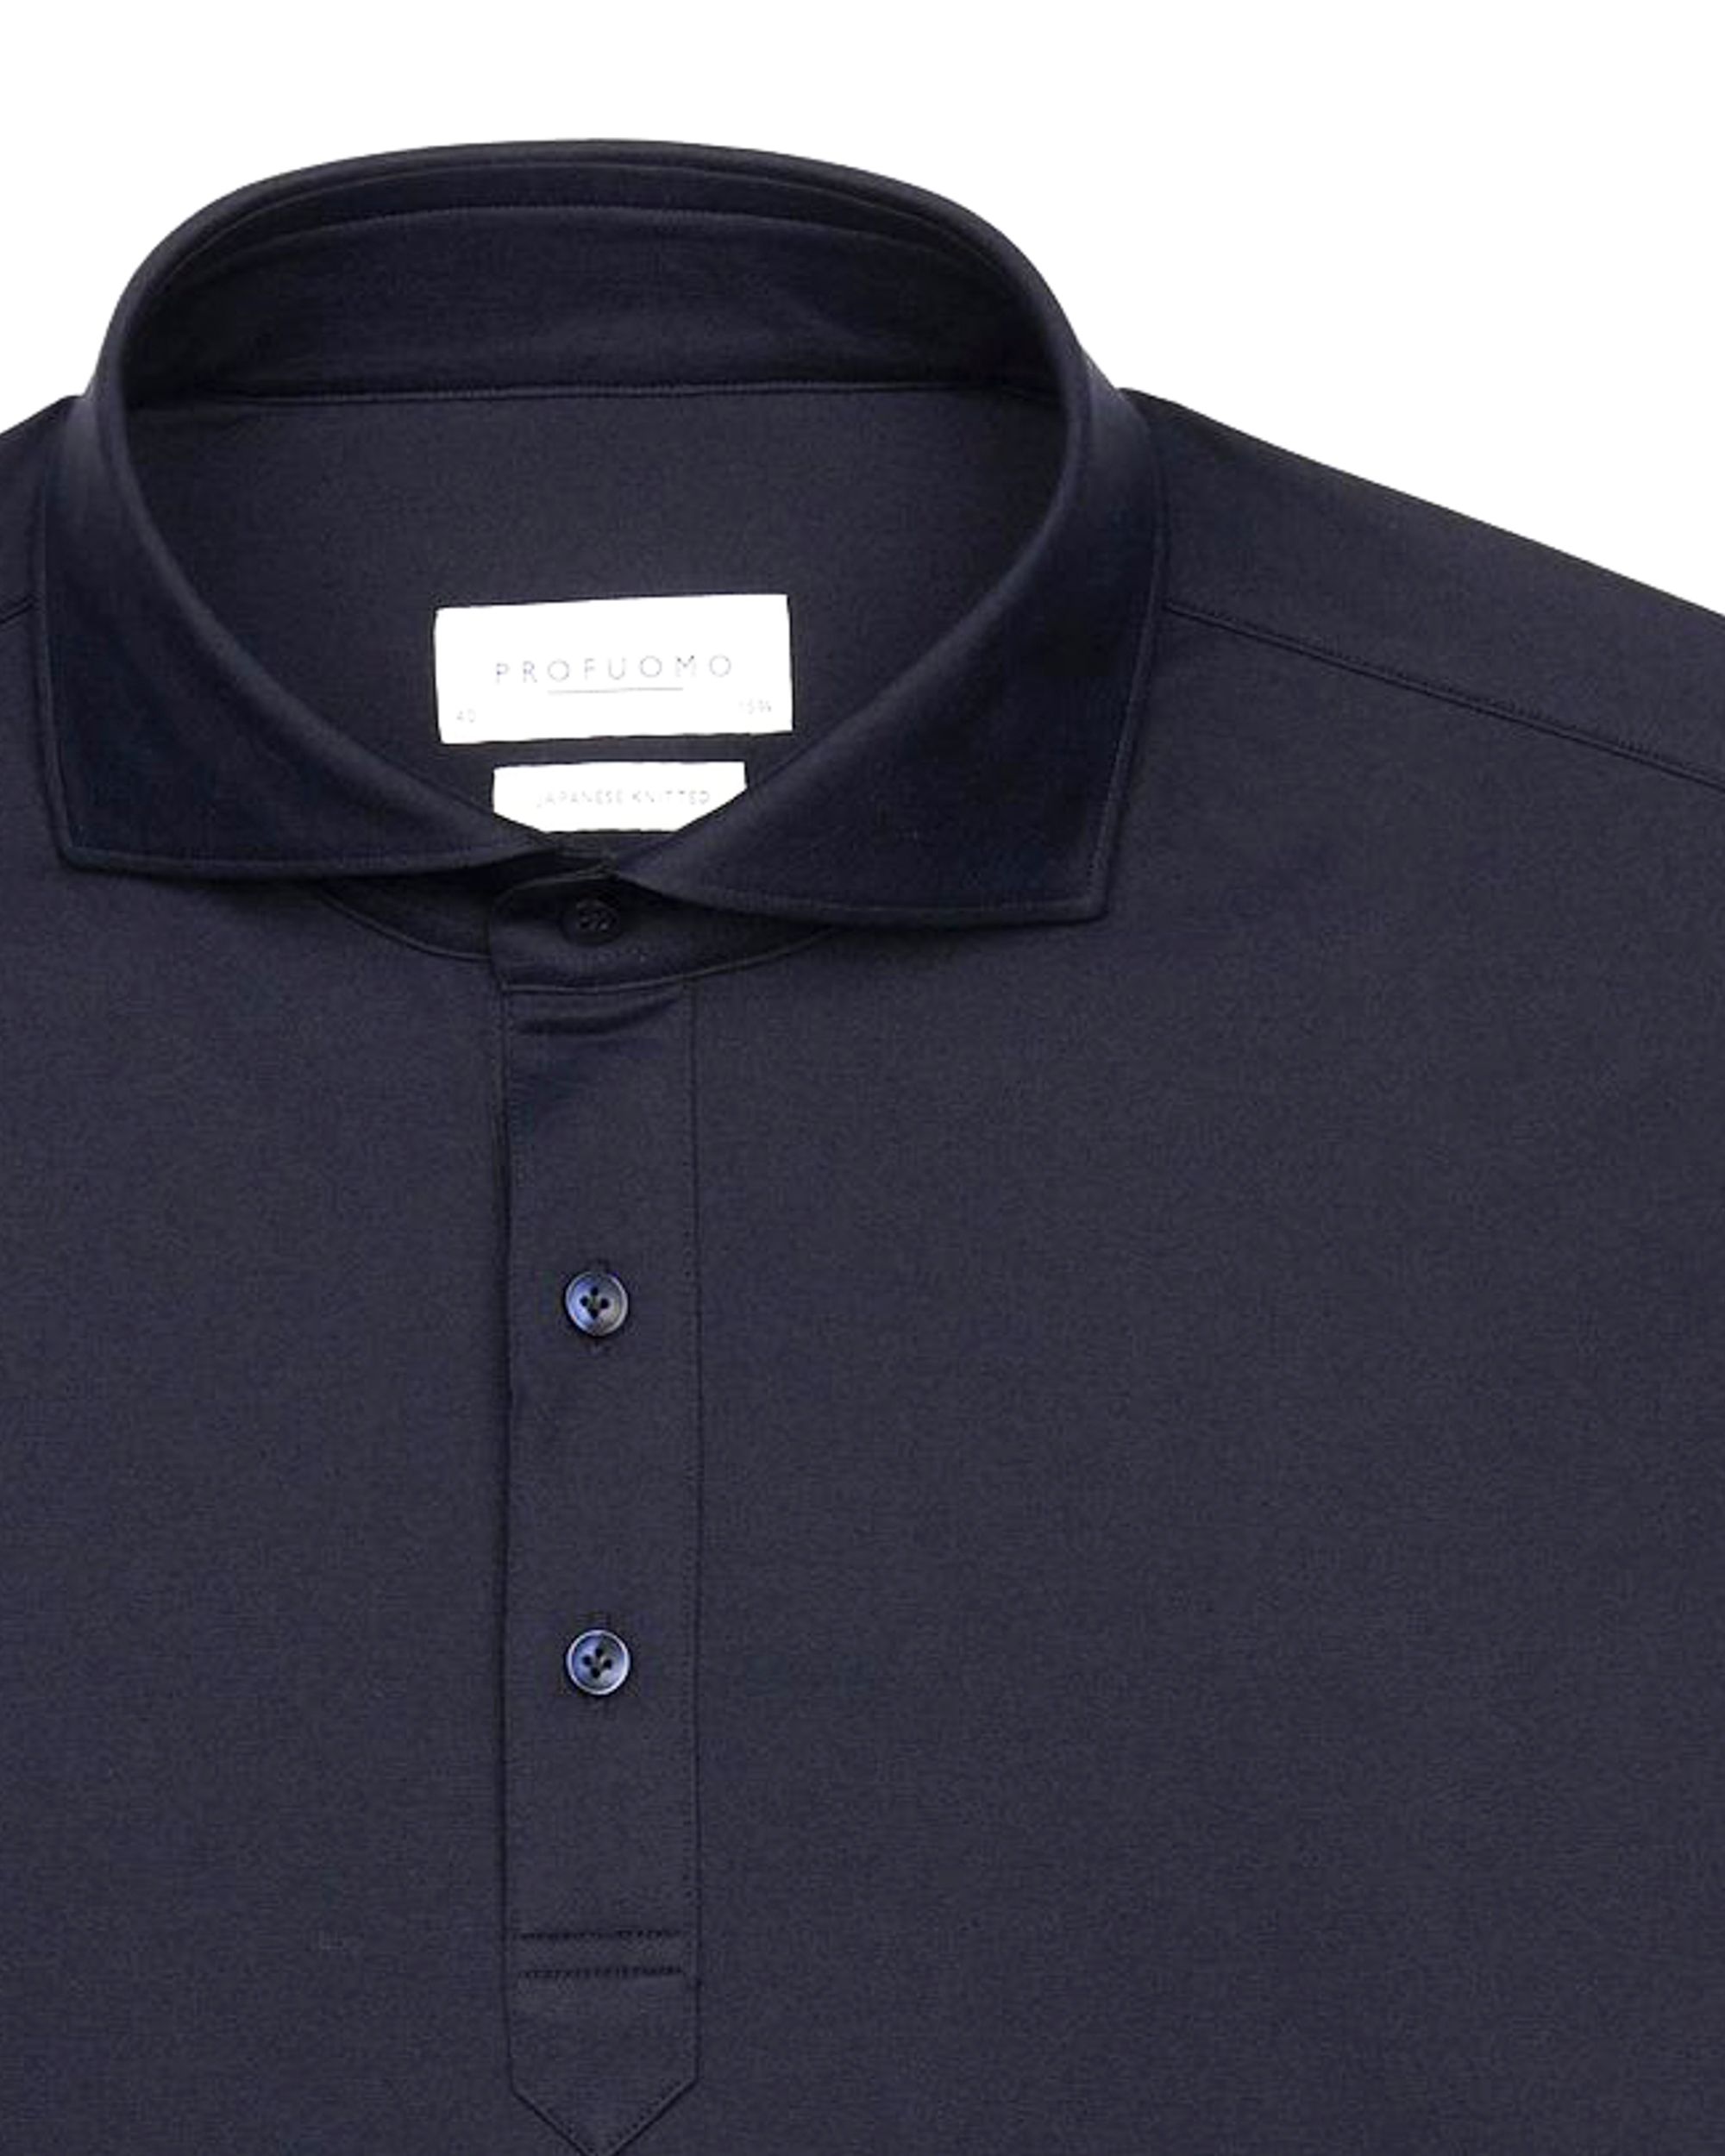 Profuomo Japanese Knitted Polo LM Blauw 091711-001-38